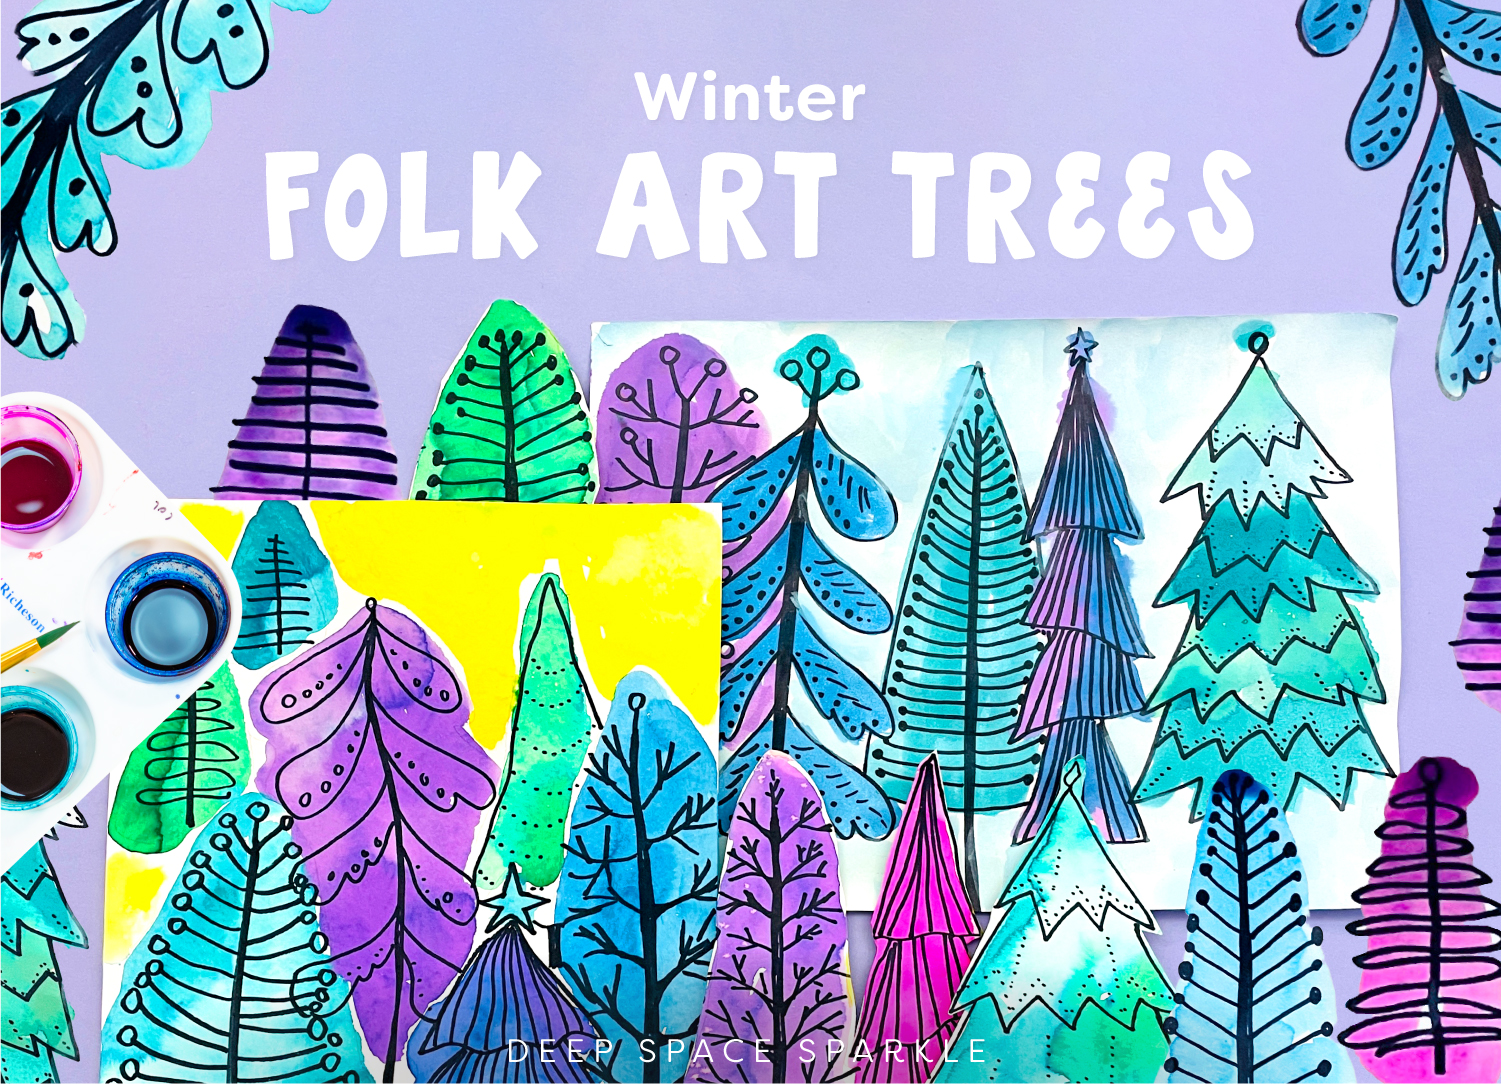 Winter Folk Art Trees | Easy art lesson for kids using marker and watercolor to make colorful simple winter trees